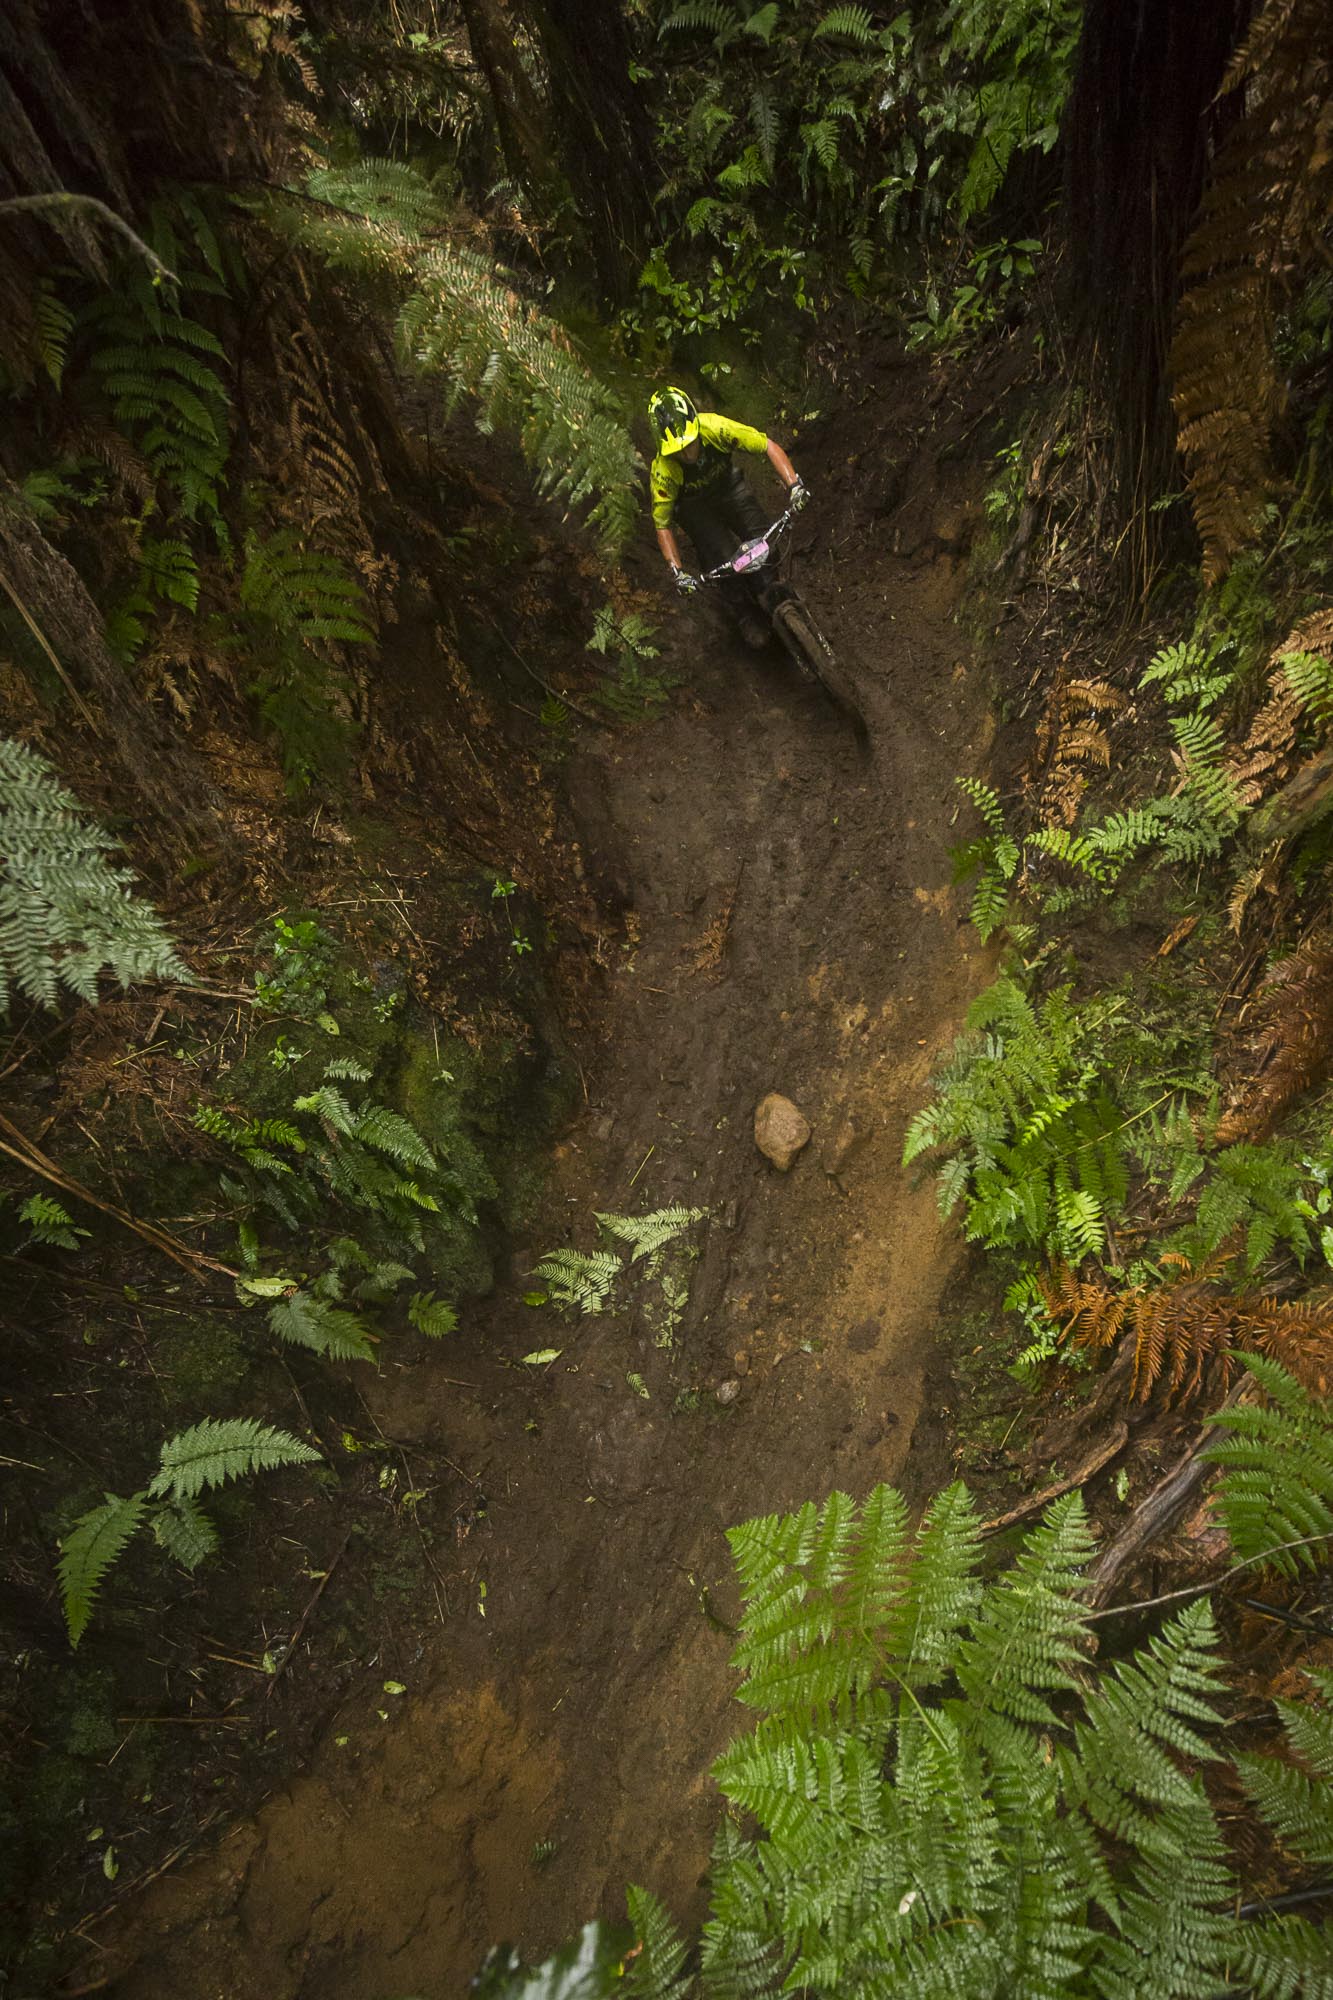 Bex is a savvy rider in the mud, she just came third at the NZ Enduro and we all know how that race went!